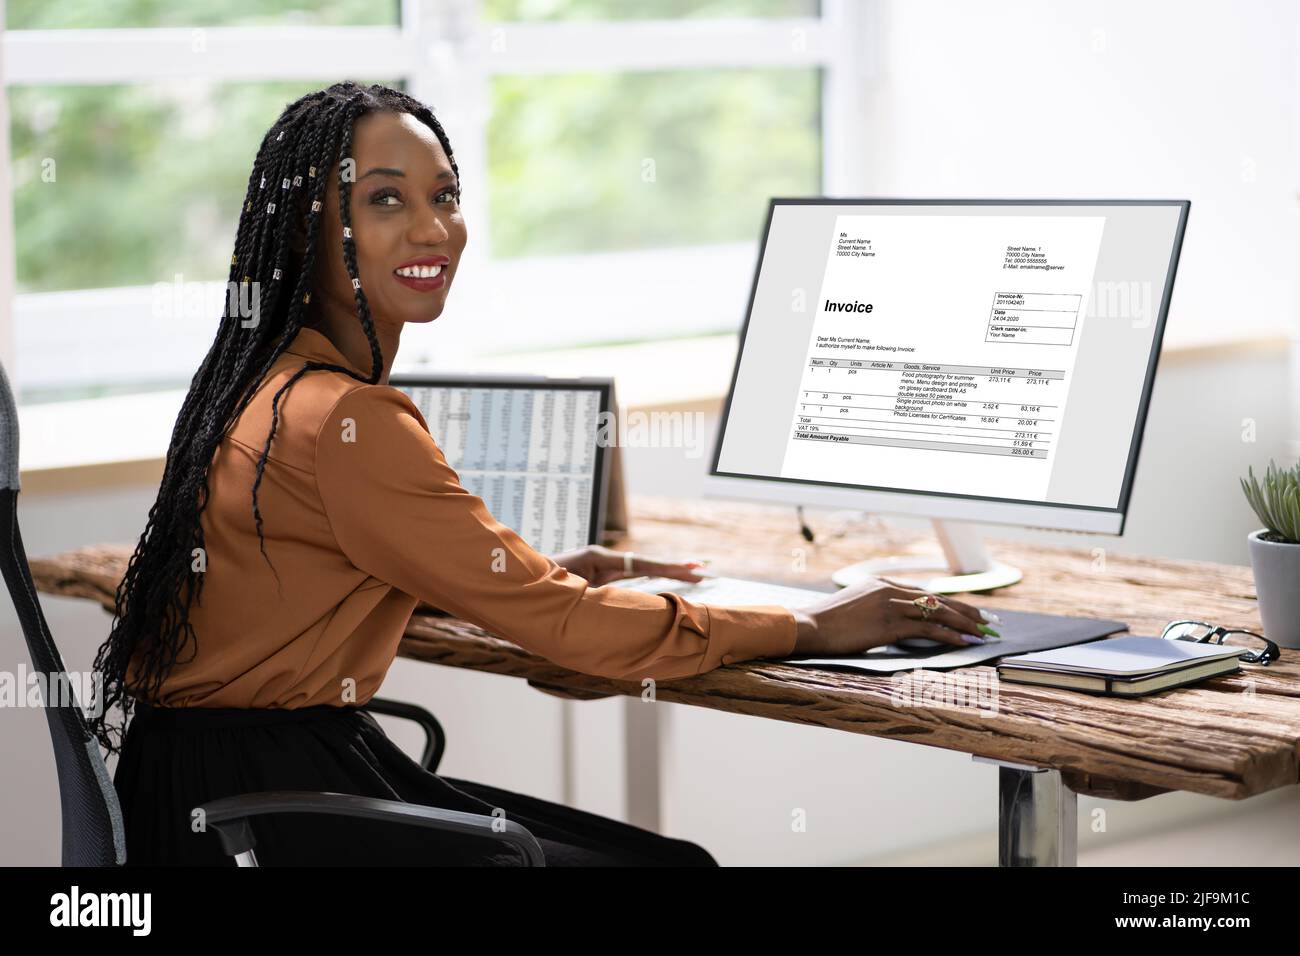 African American Lady Using Computer For Online Invoice Calculation Stock Photo